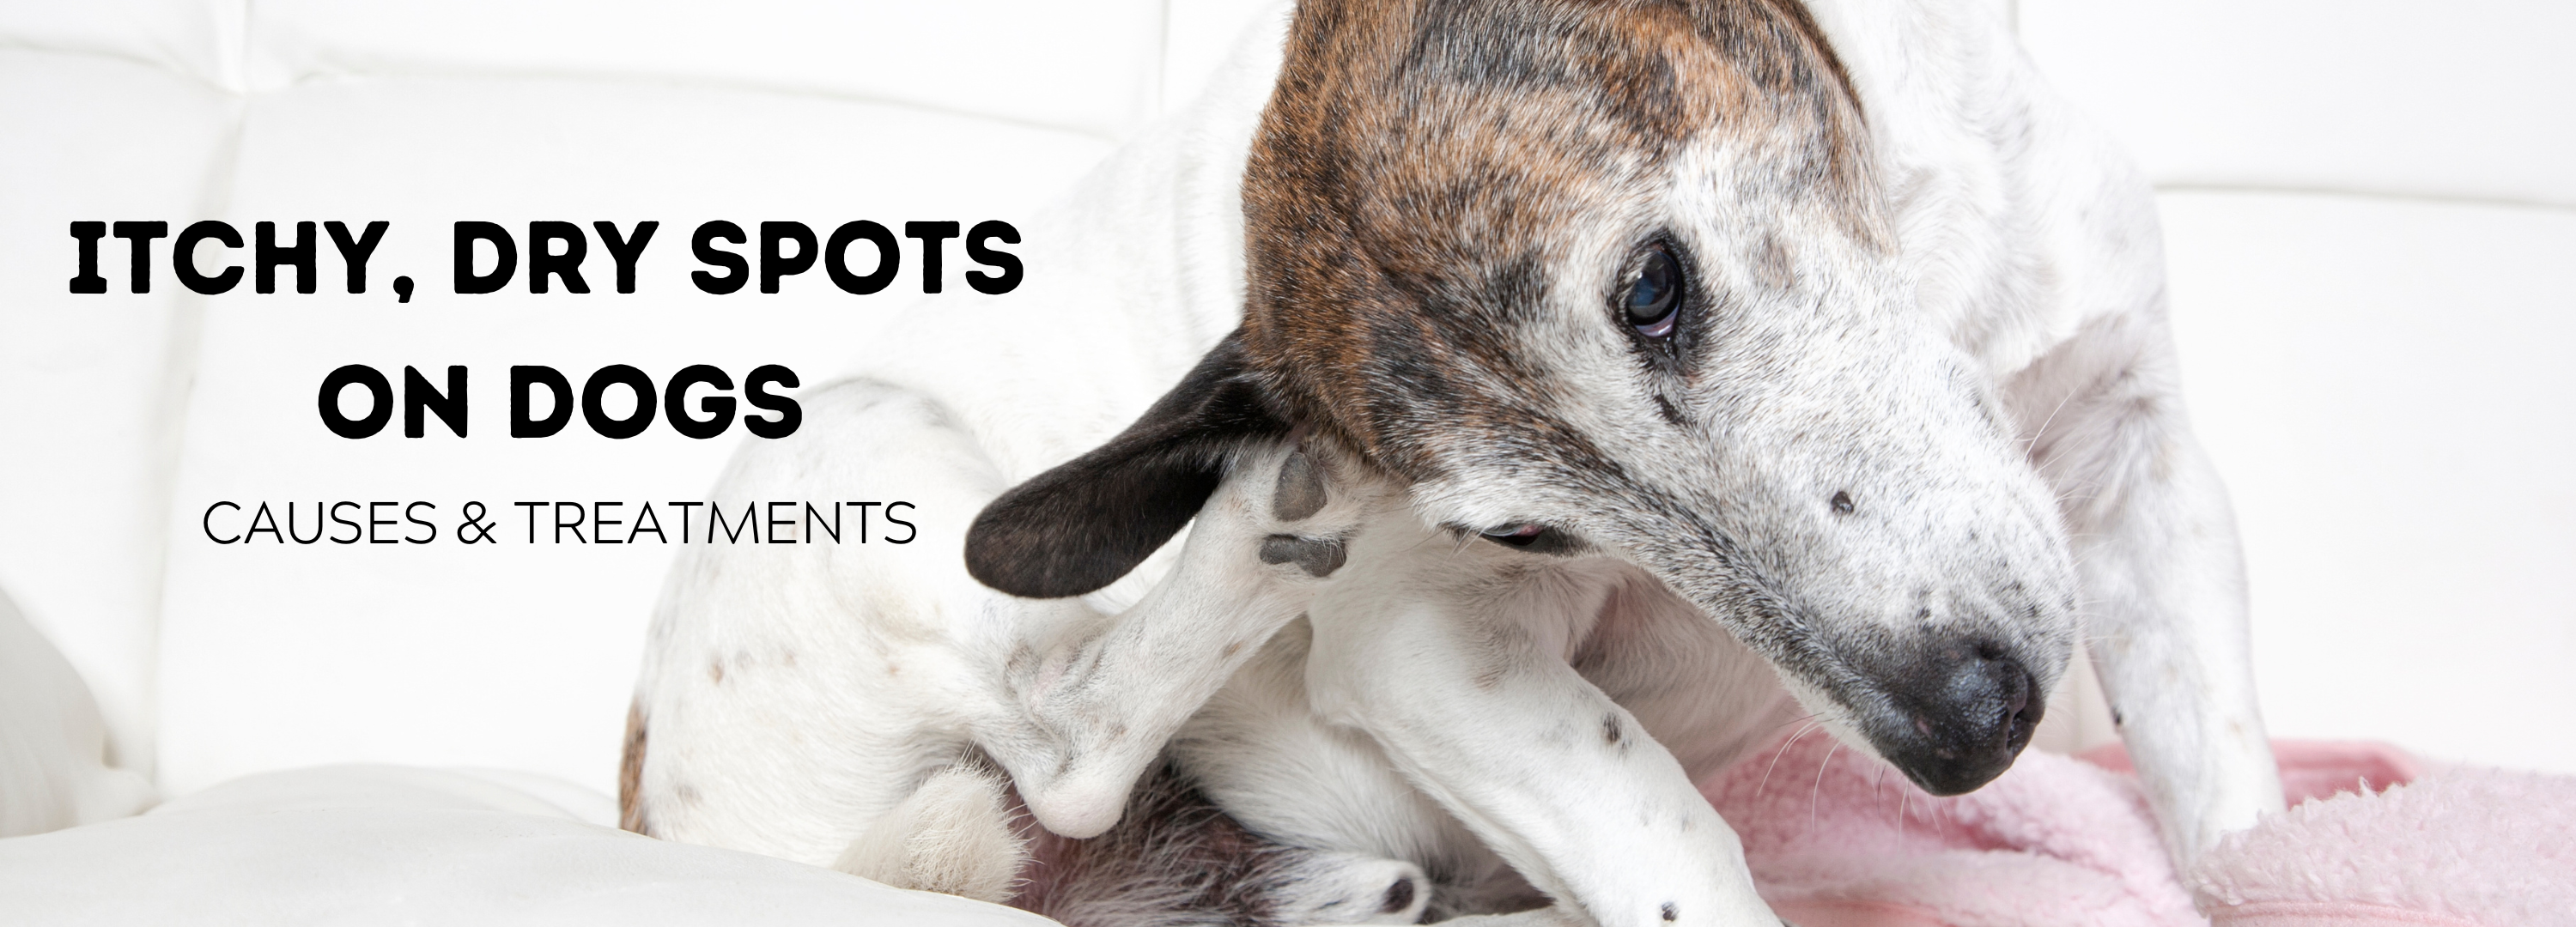 Causes & Treatments for itchy dry spots on dogs